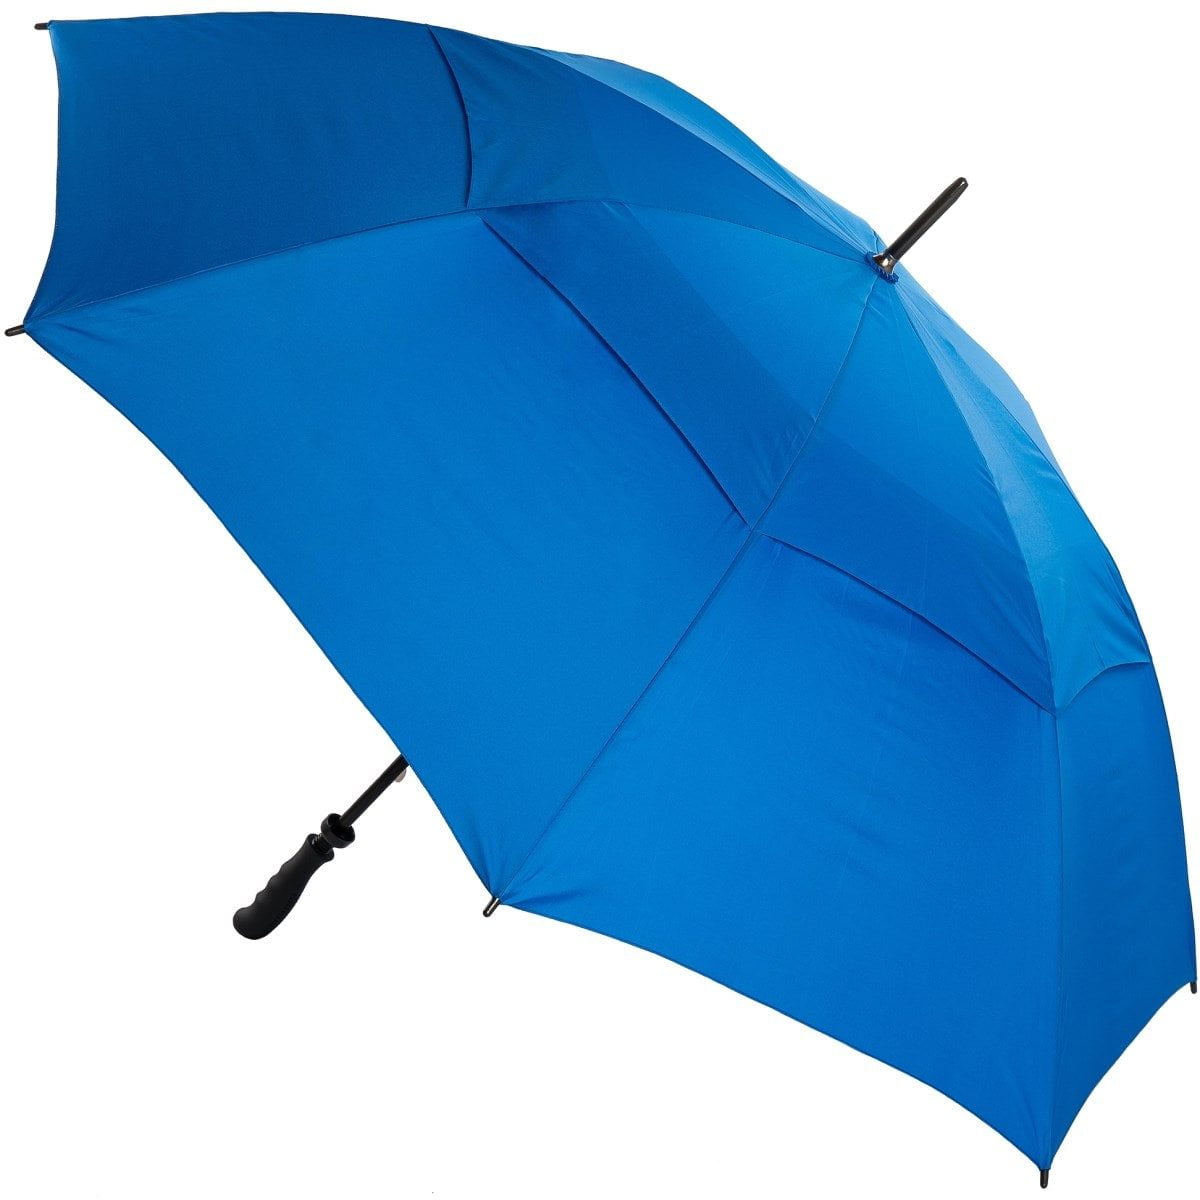 Royal blue vented golf umbrella, completely windproof!